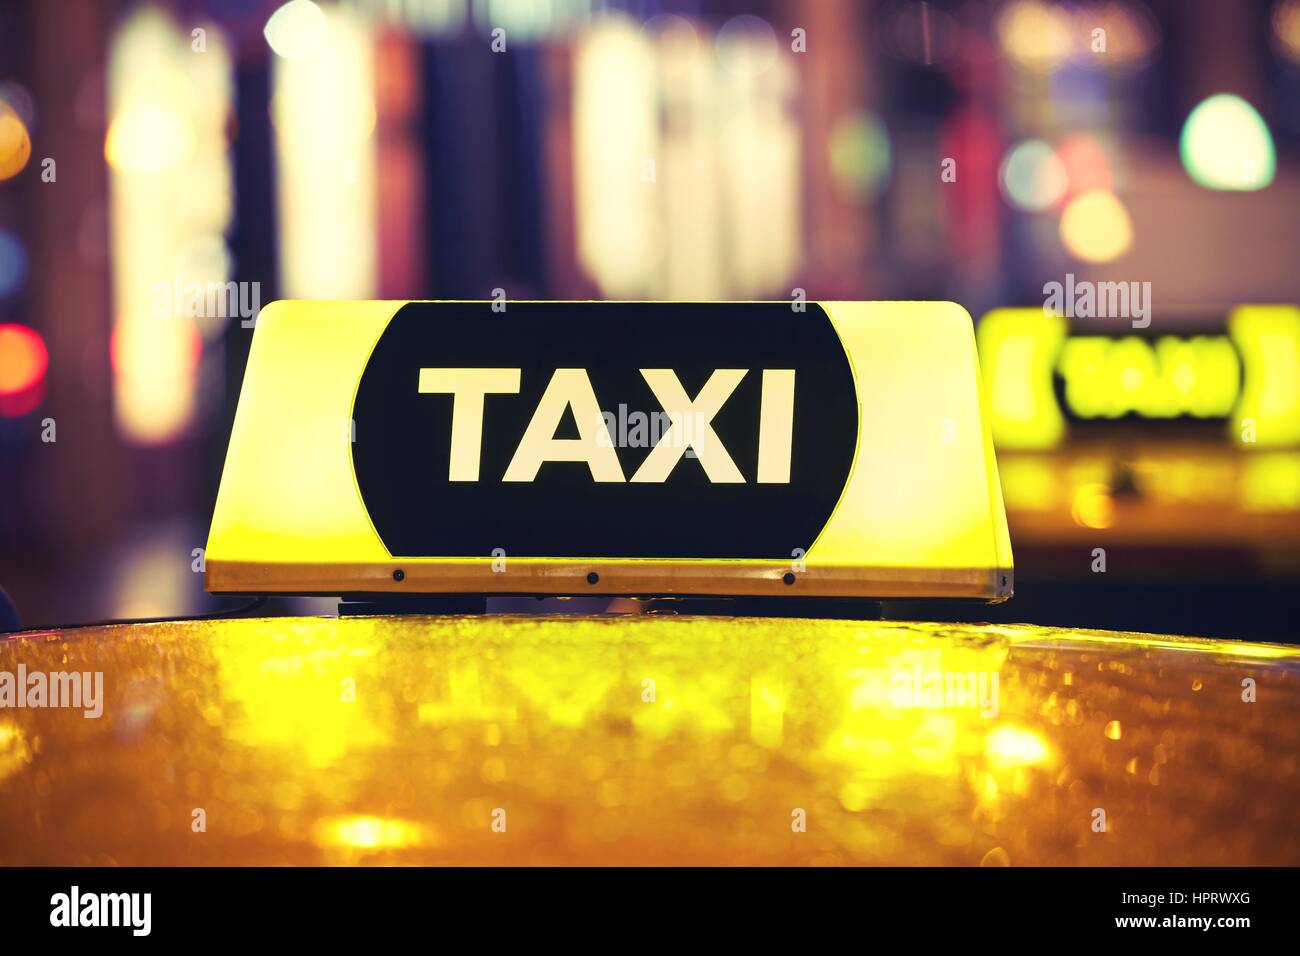 Taxi car on the street at night Stock Photo